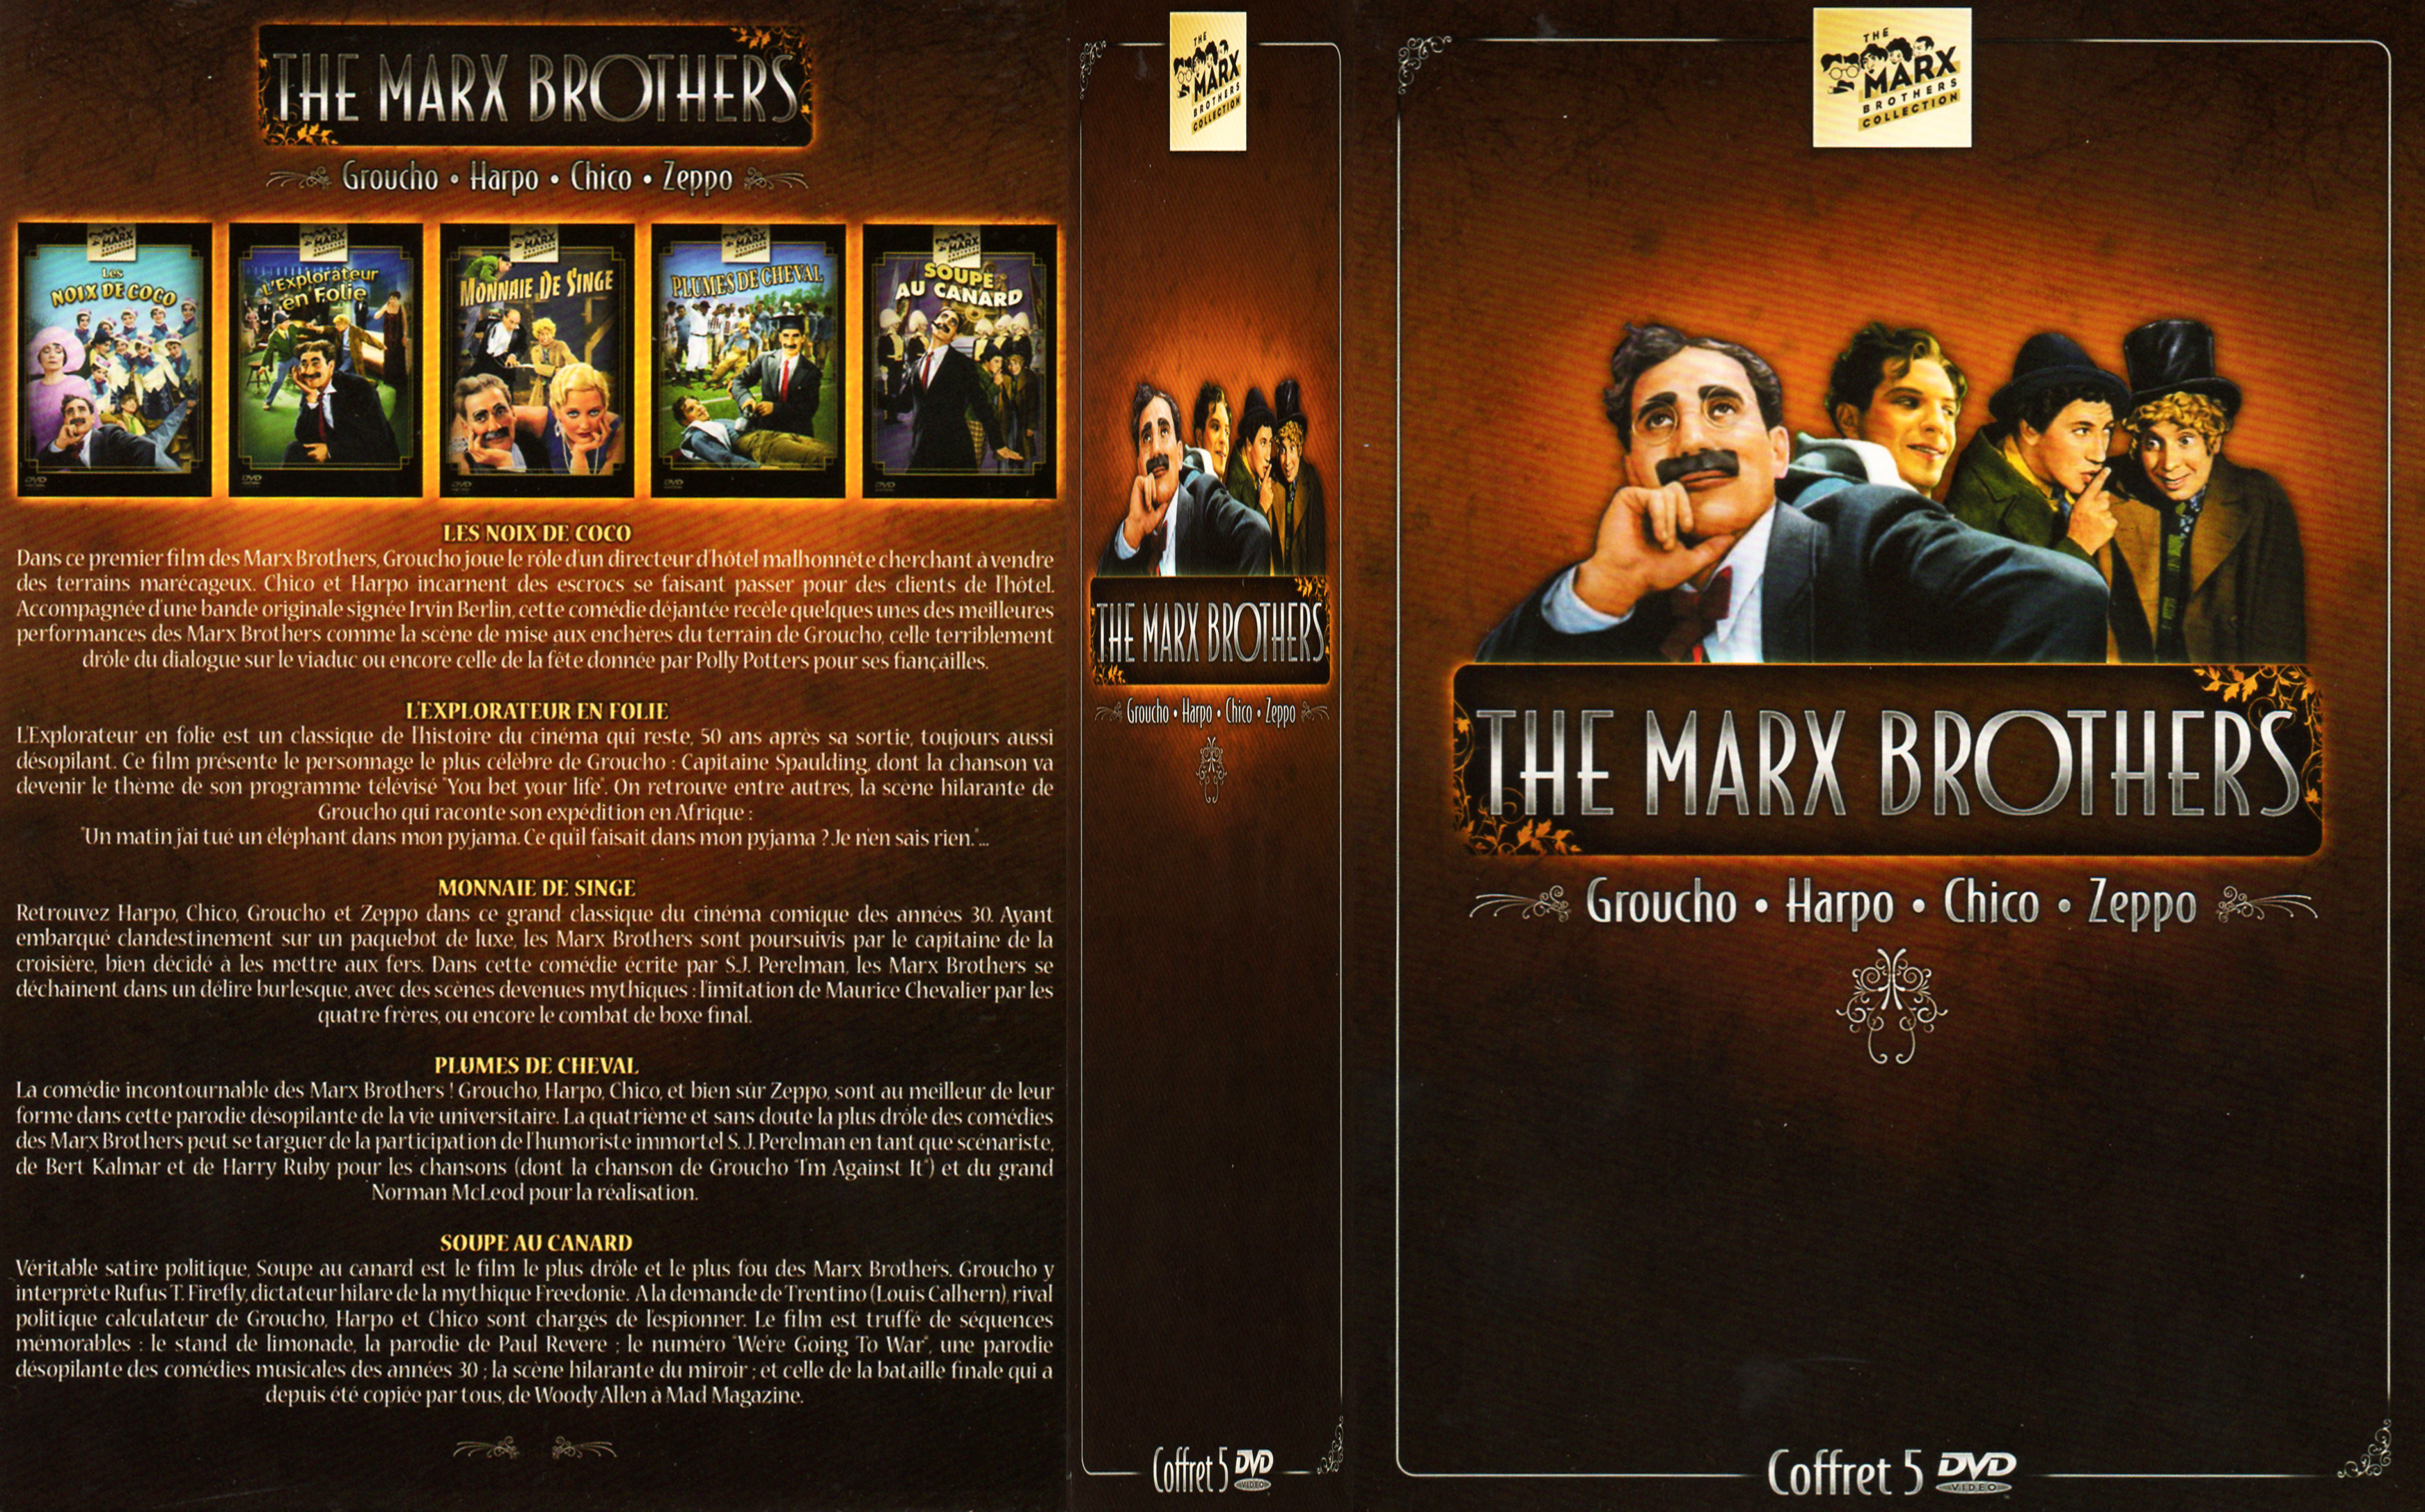 Jaquette DVD The Marx Brothers COFFRET